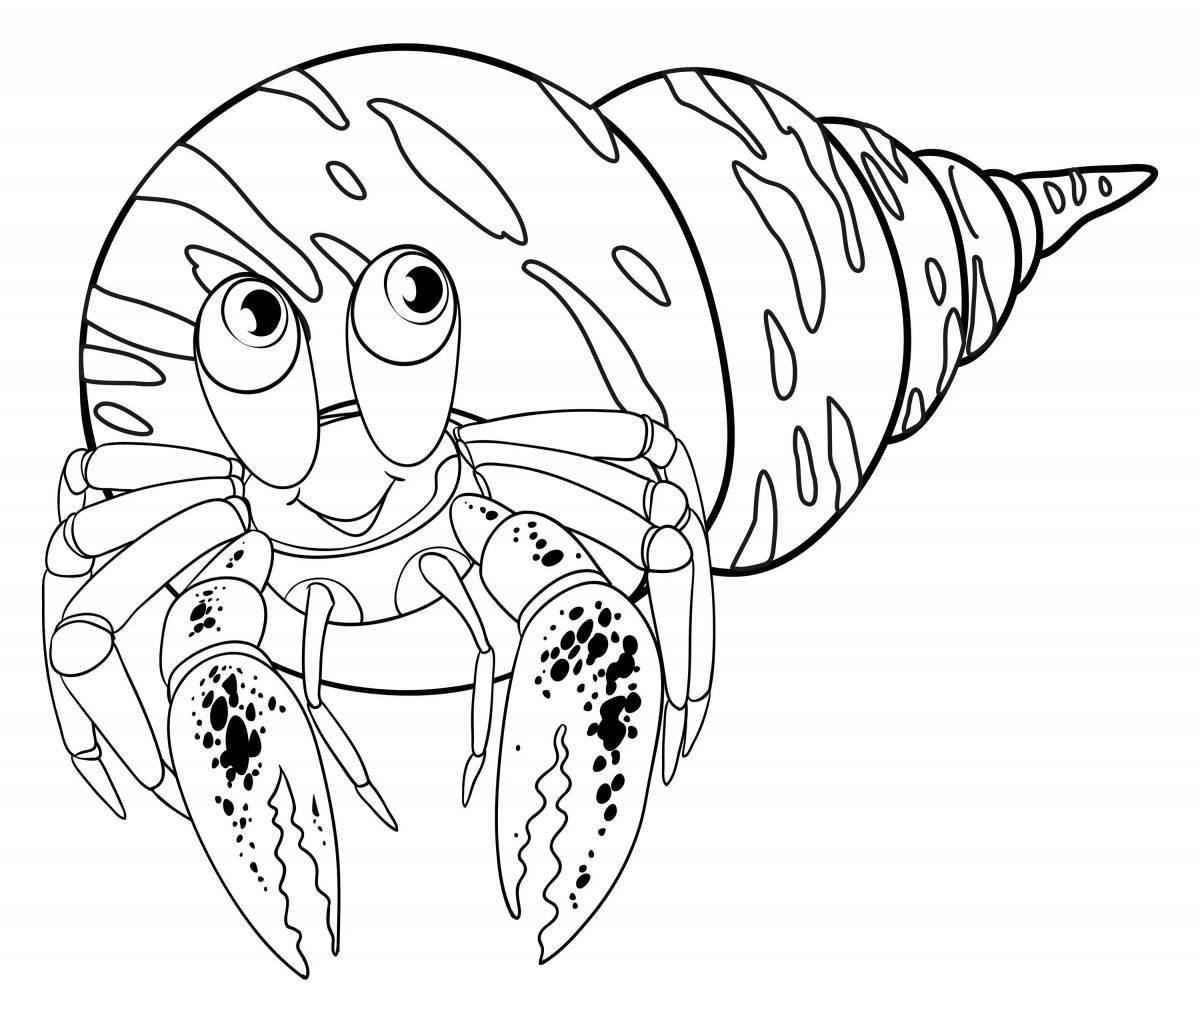 Glowing hermit crab coloring page